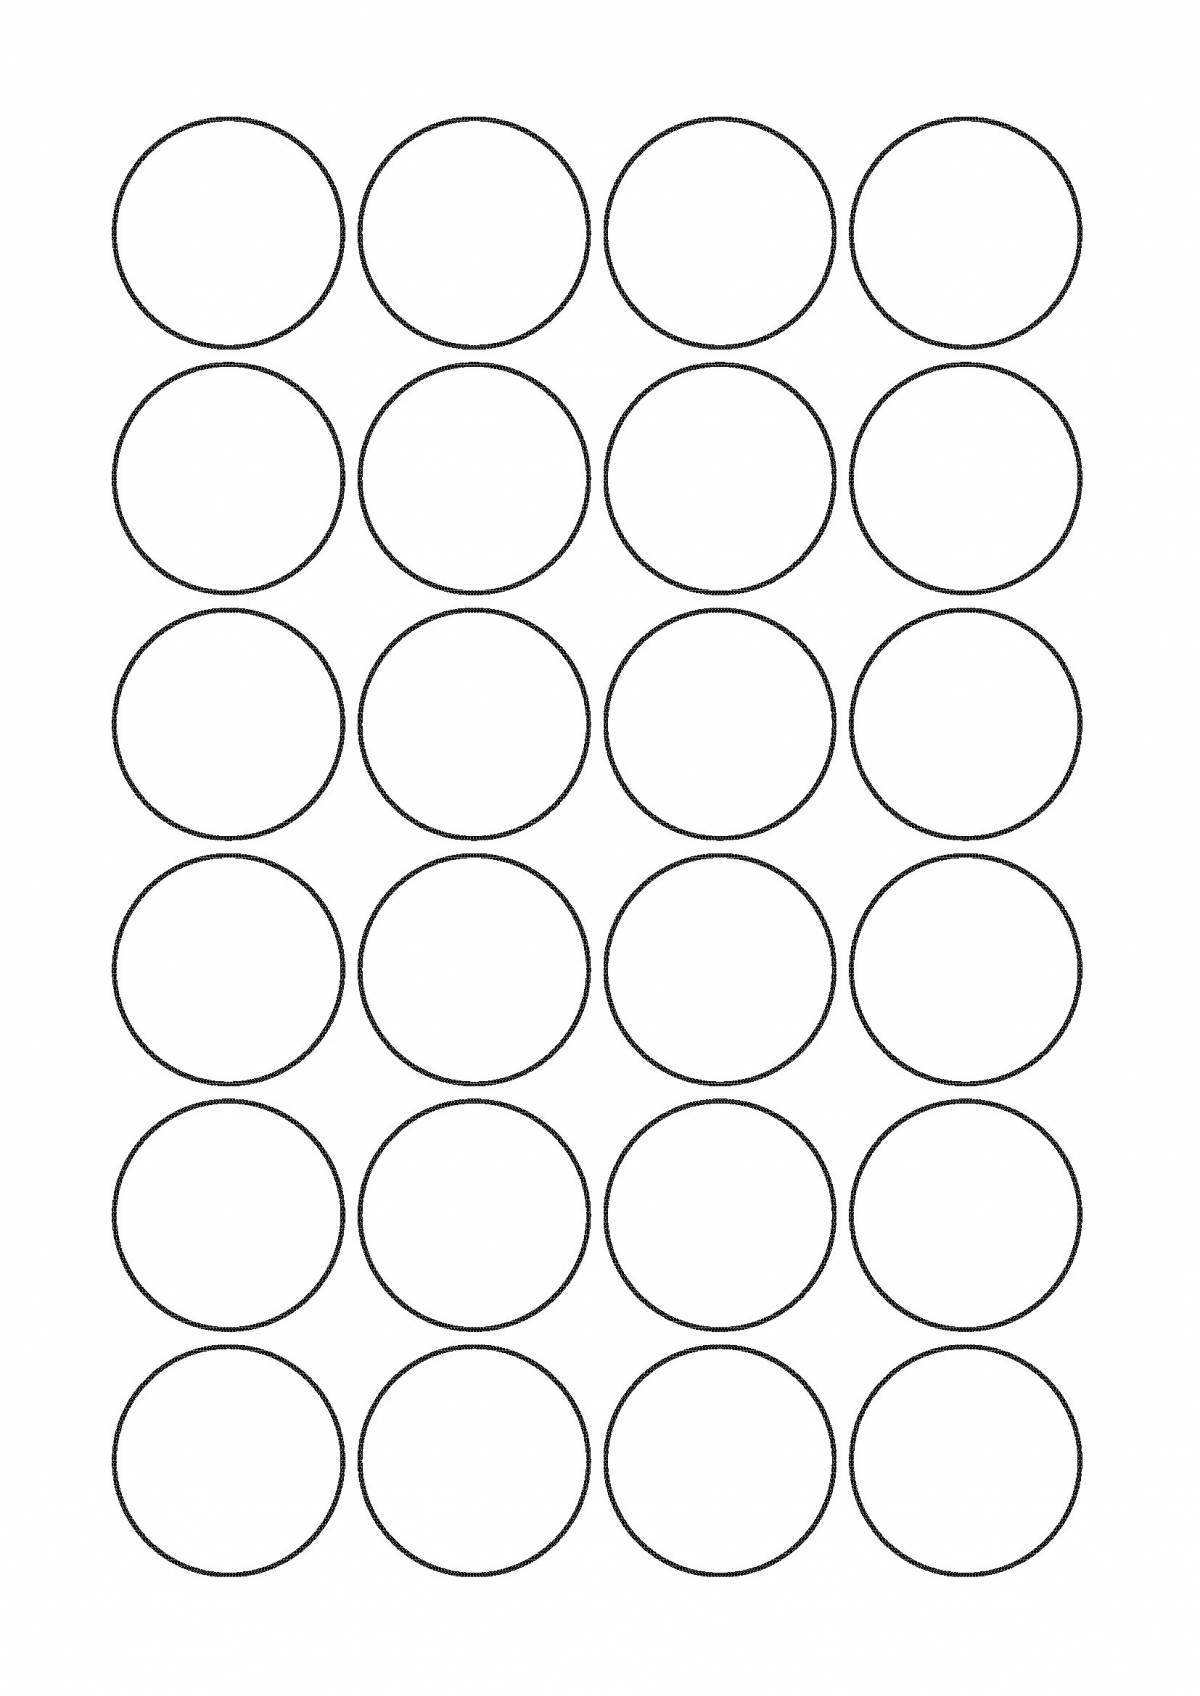 Coloring page mysterious circles